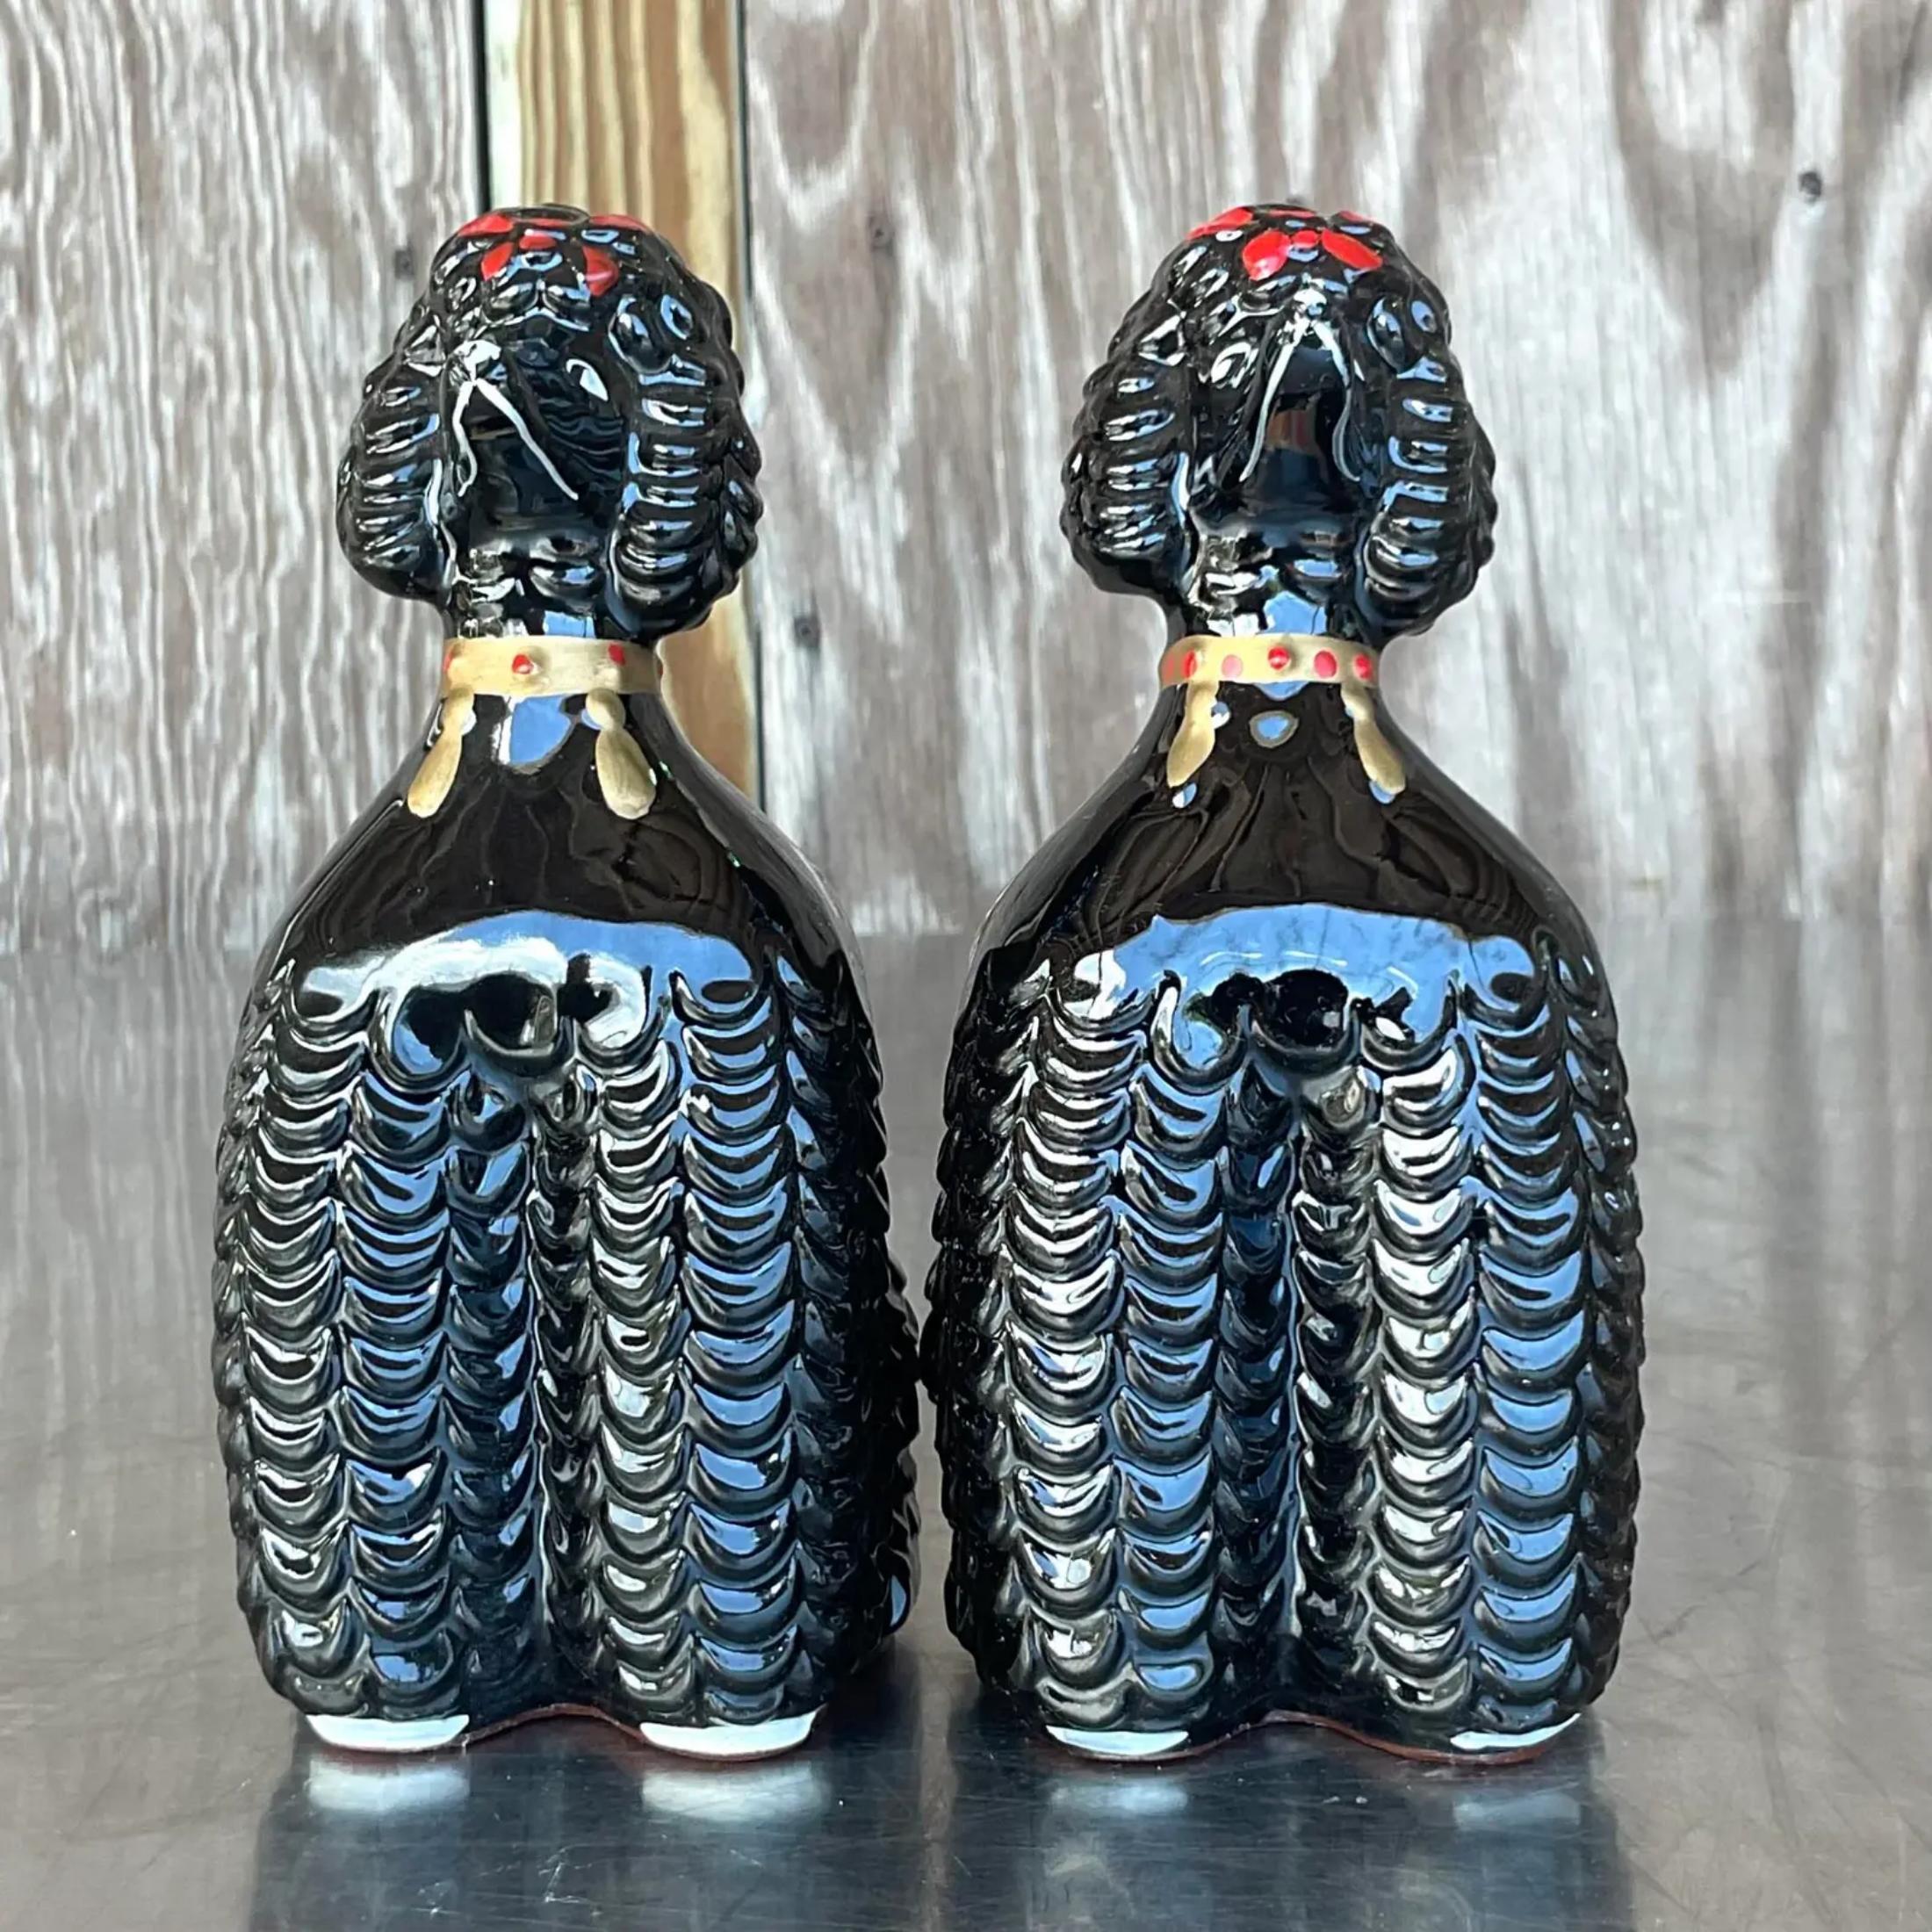 A fabulous pair of vintage MCM small planters. A charming pair of black poodles in a gloss ceramic finish. Hand painted detail. Perfect for your Desk or window box. Acquired from a Palm Beach estate.